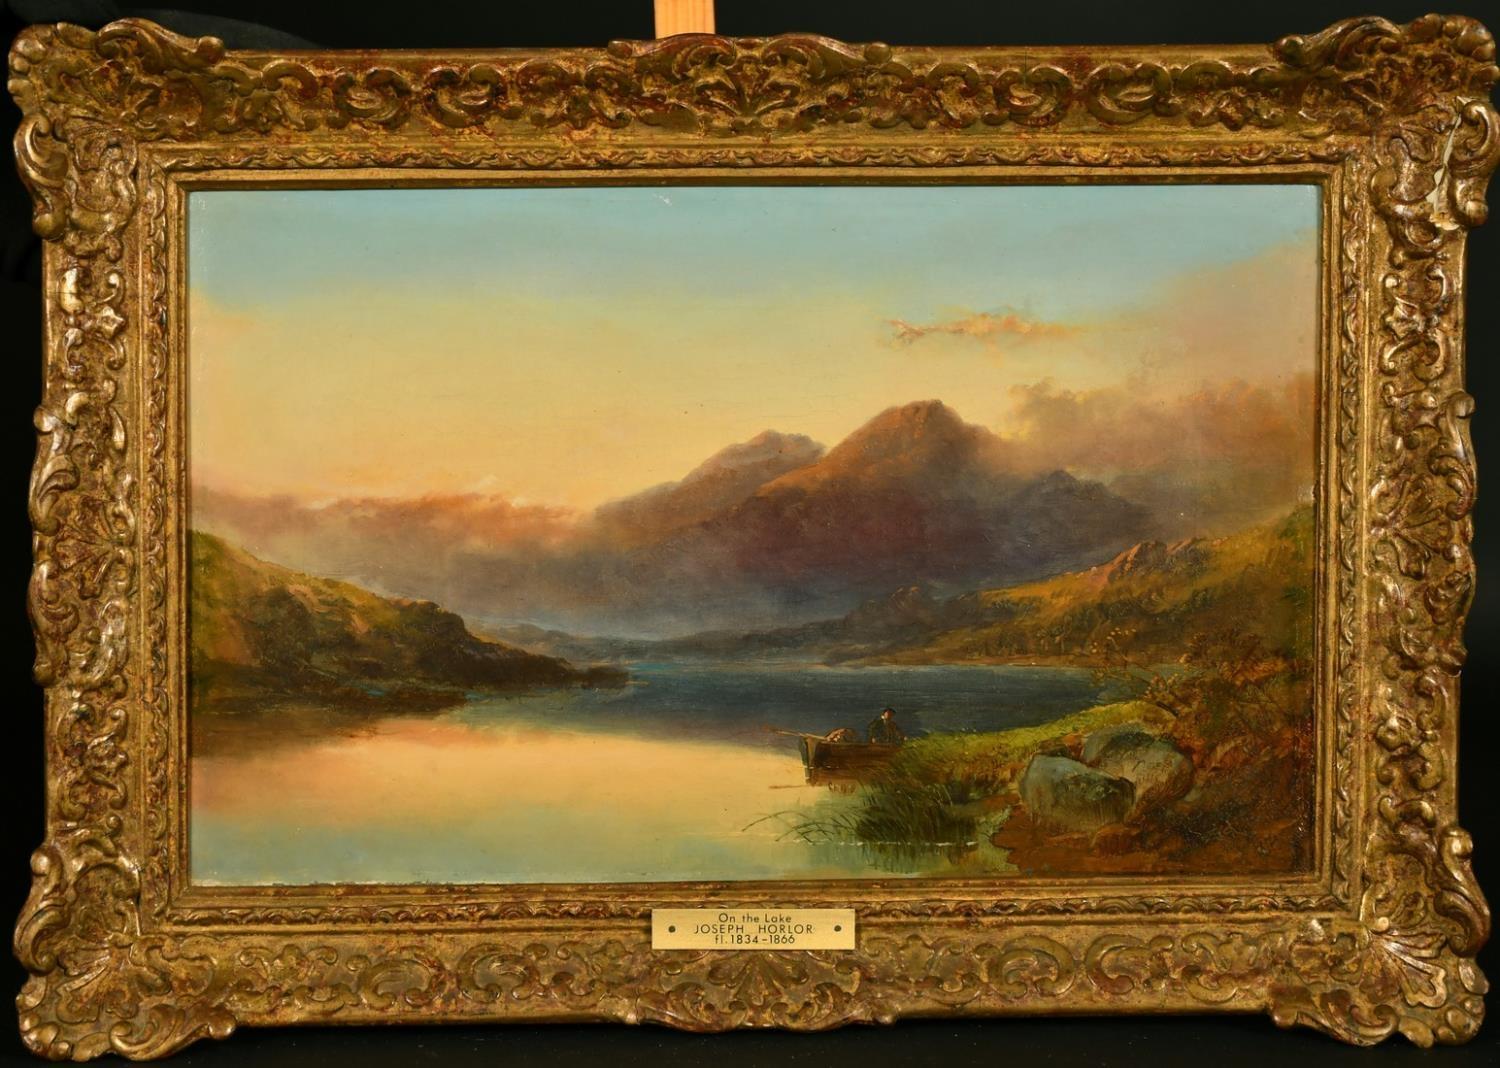 Fine Victorian Oil Figure in Rowing Boat at Sunset on Scottish Loch in Highlands - Painting by Joseph Horlor